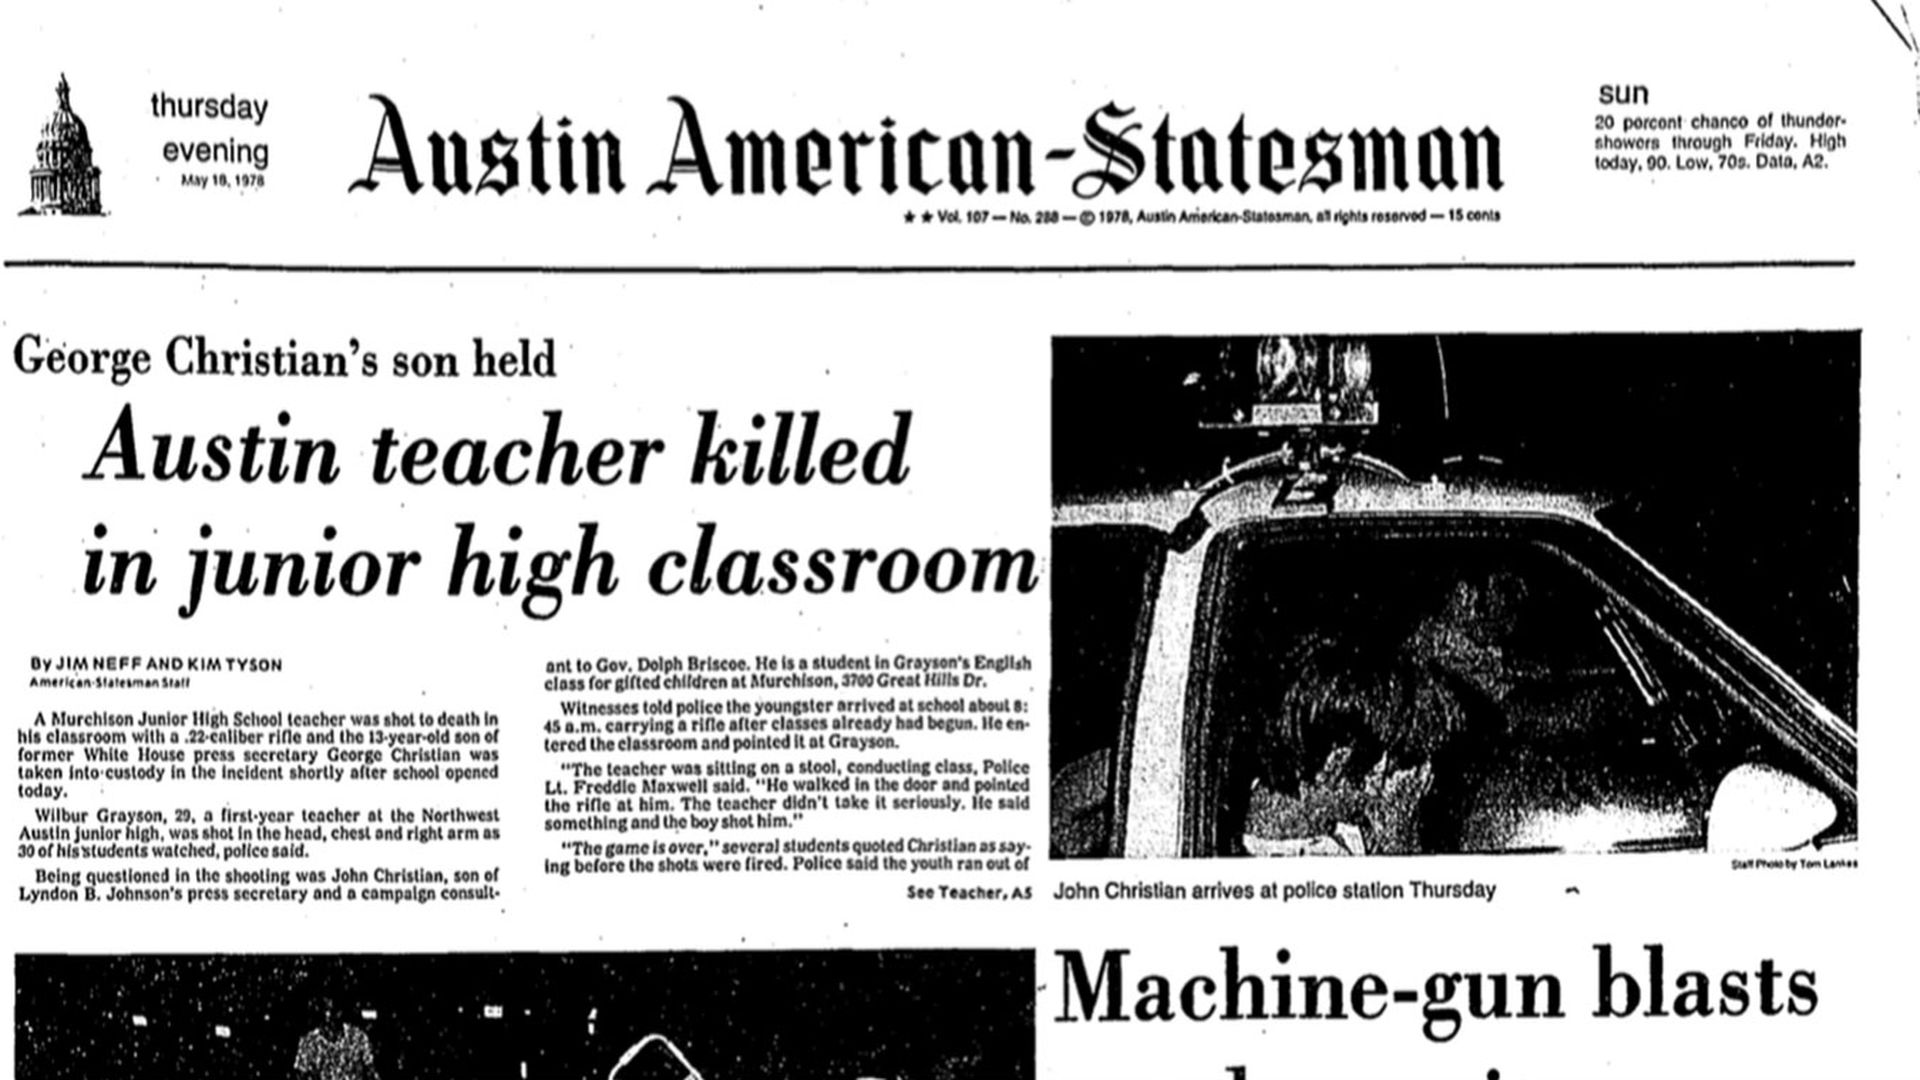 Front page of the Austin American-Statesman from May 18, 1978